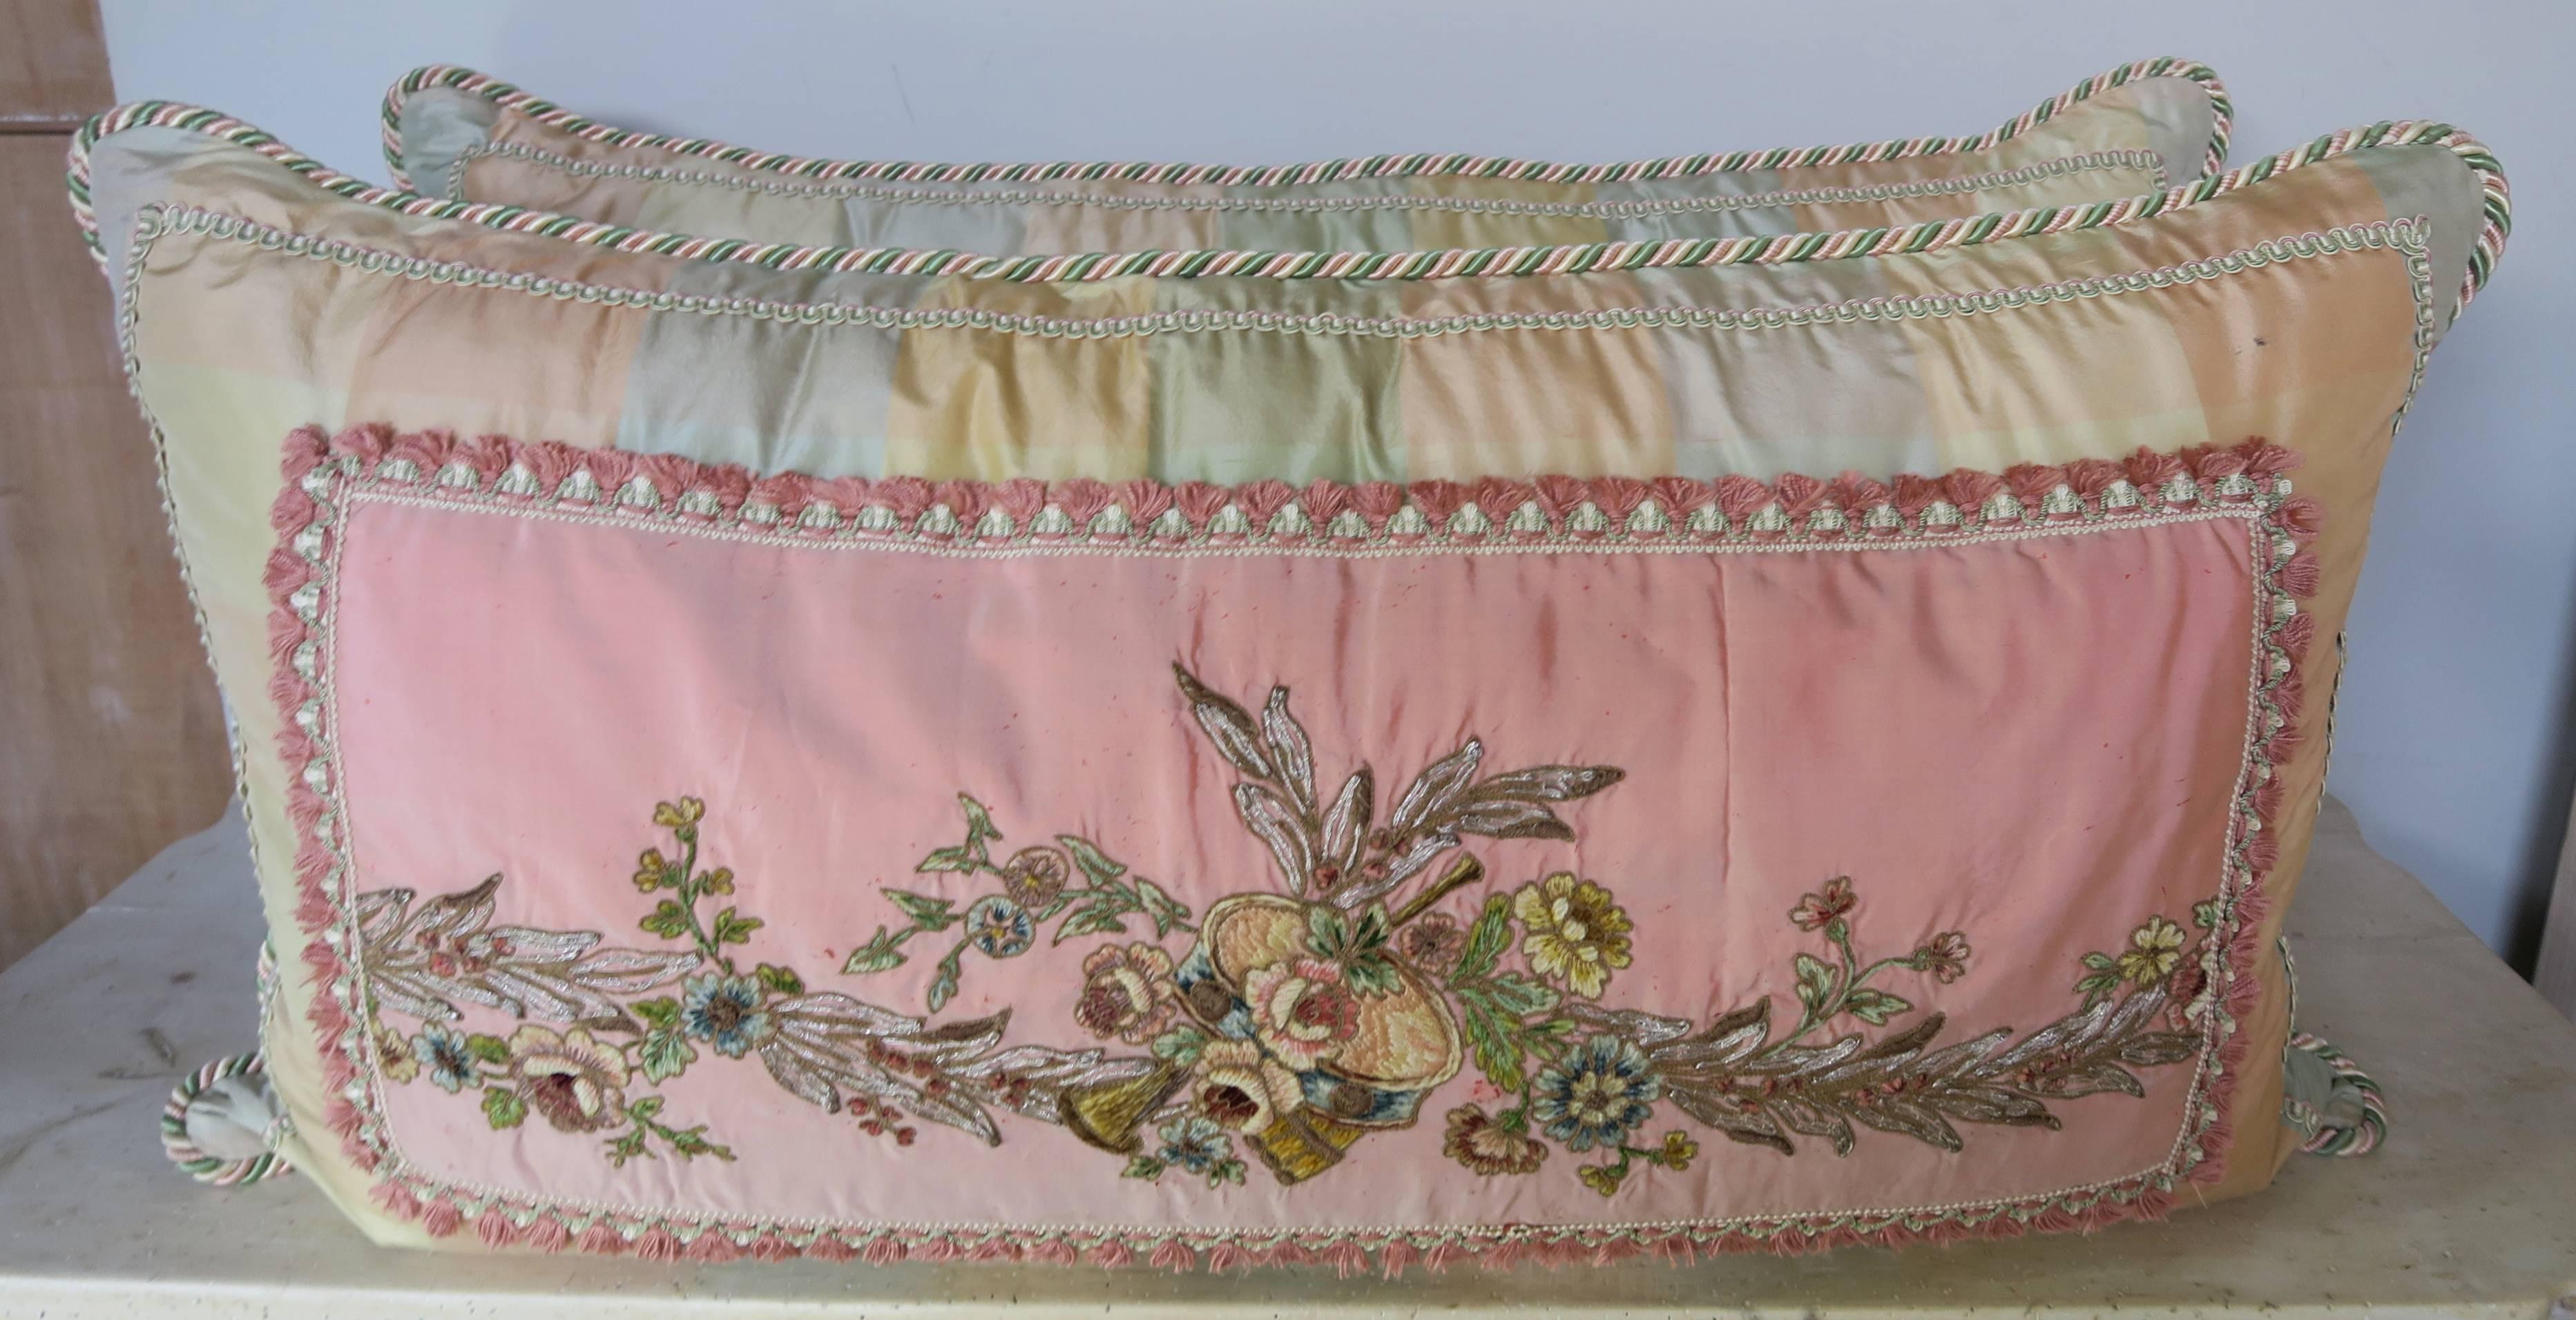 A pair of custom pillows made with 19th century French metallic and chenille embroidered applique combined with contemporary silk and trims to create a pair of magnificent bed or sofa pillows. These pillows are works of art. Down inserts, sewn